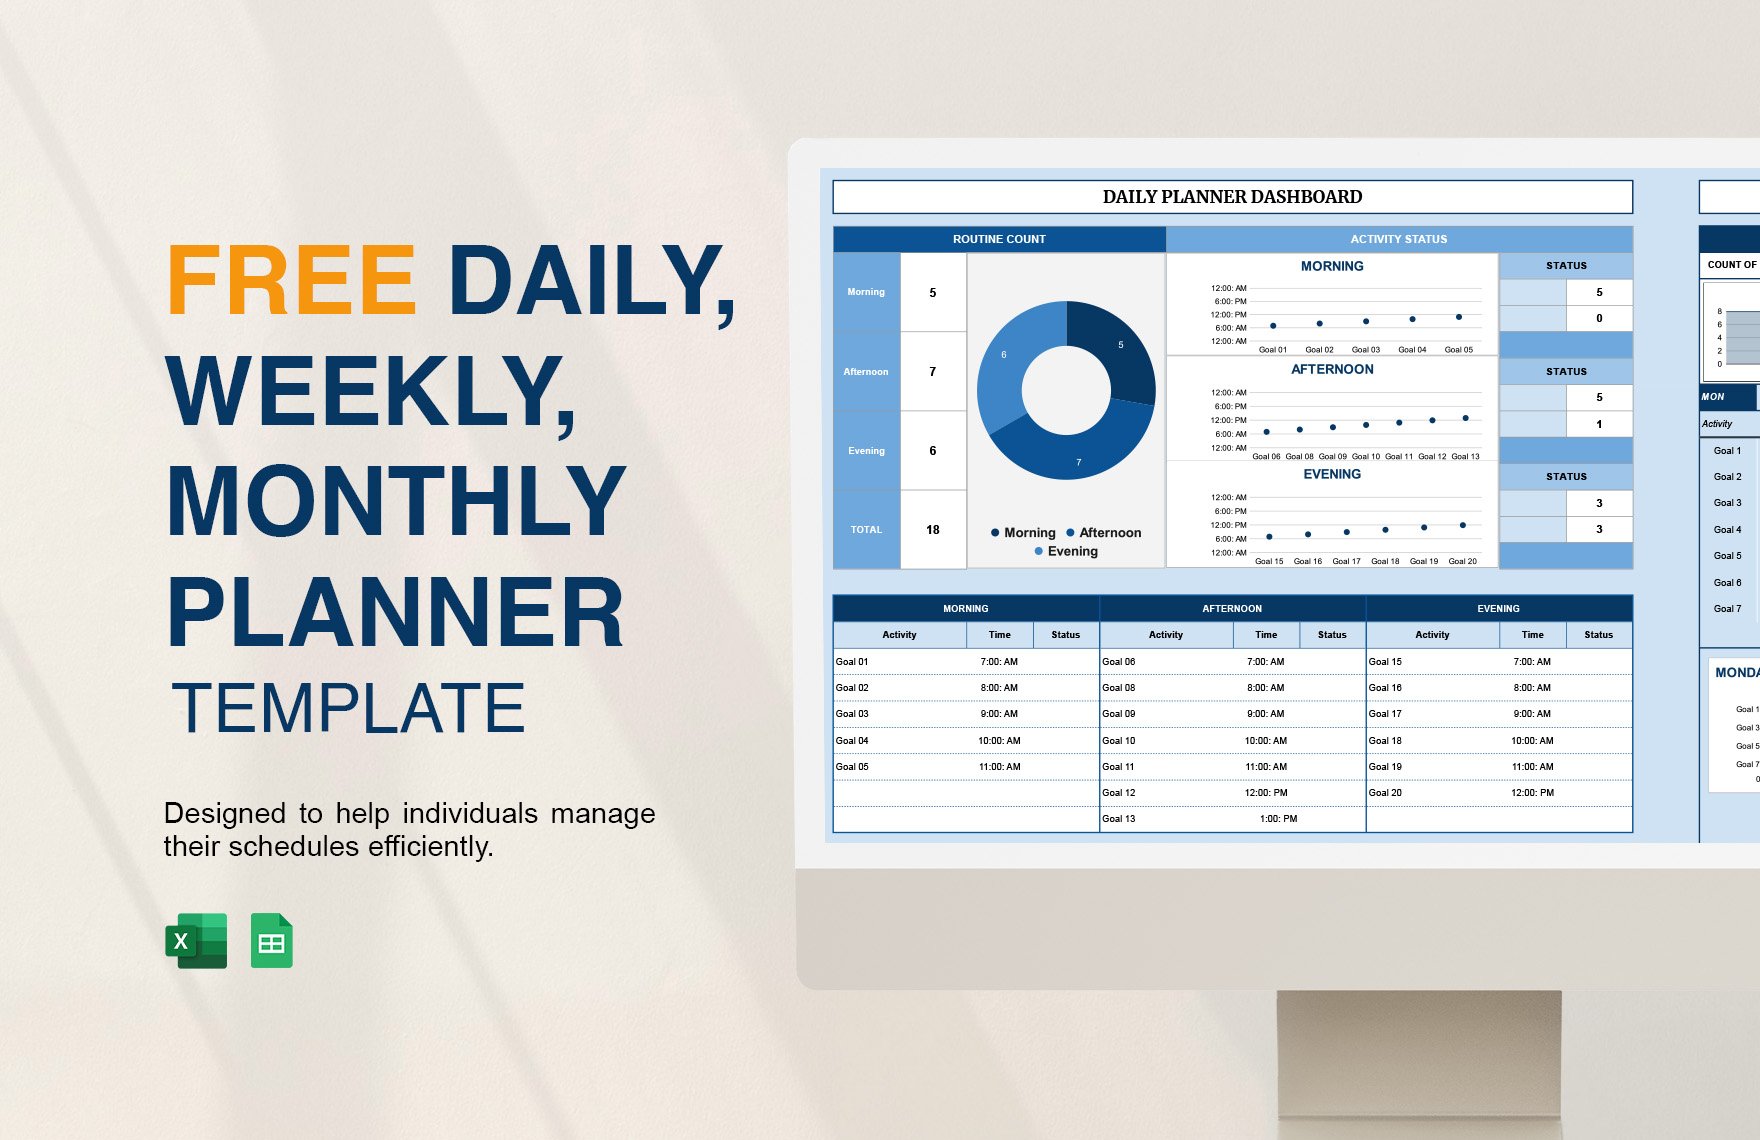 Daily, Weekly, Monthly Planner Template